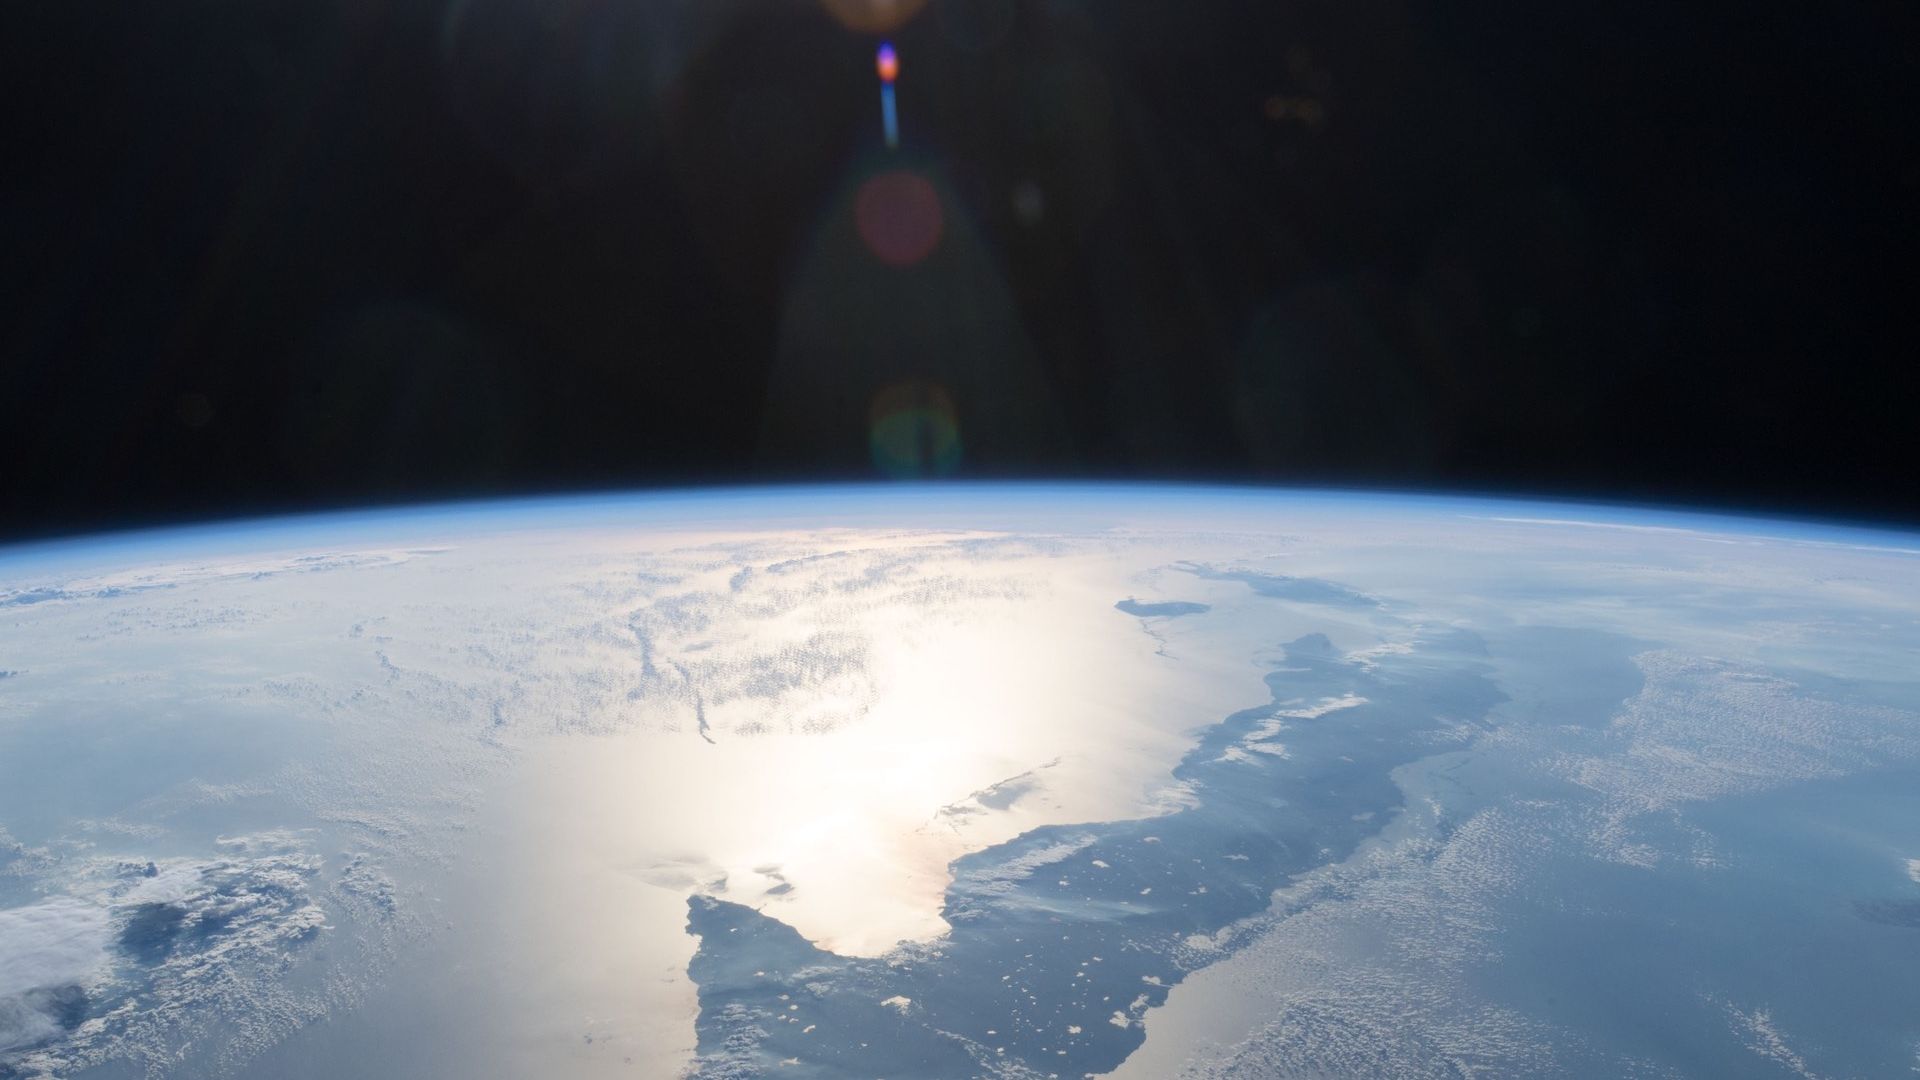 Earth illuminated in daylight from space